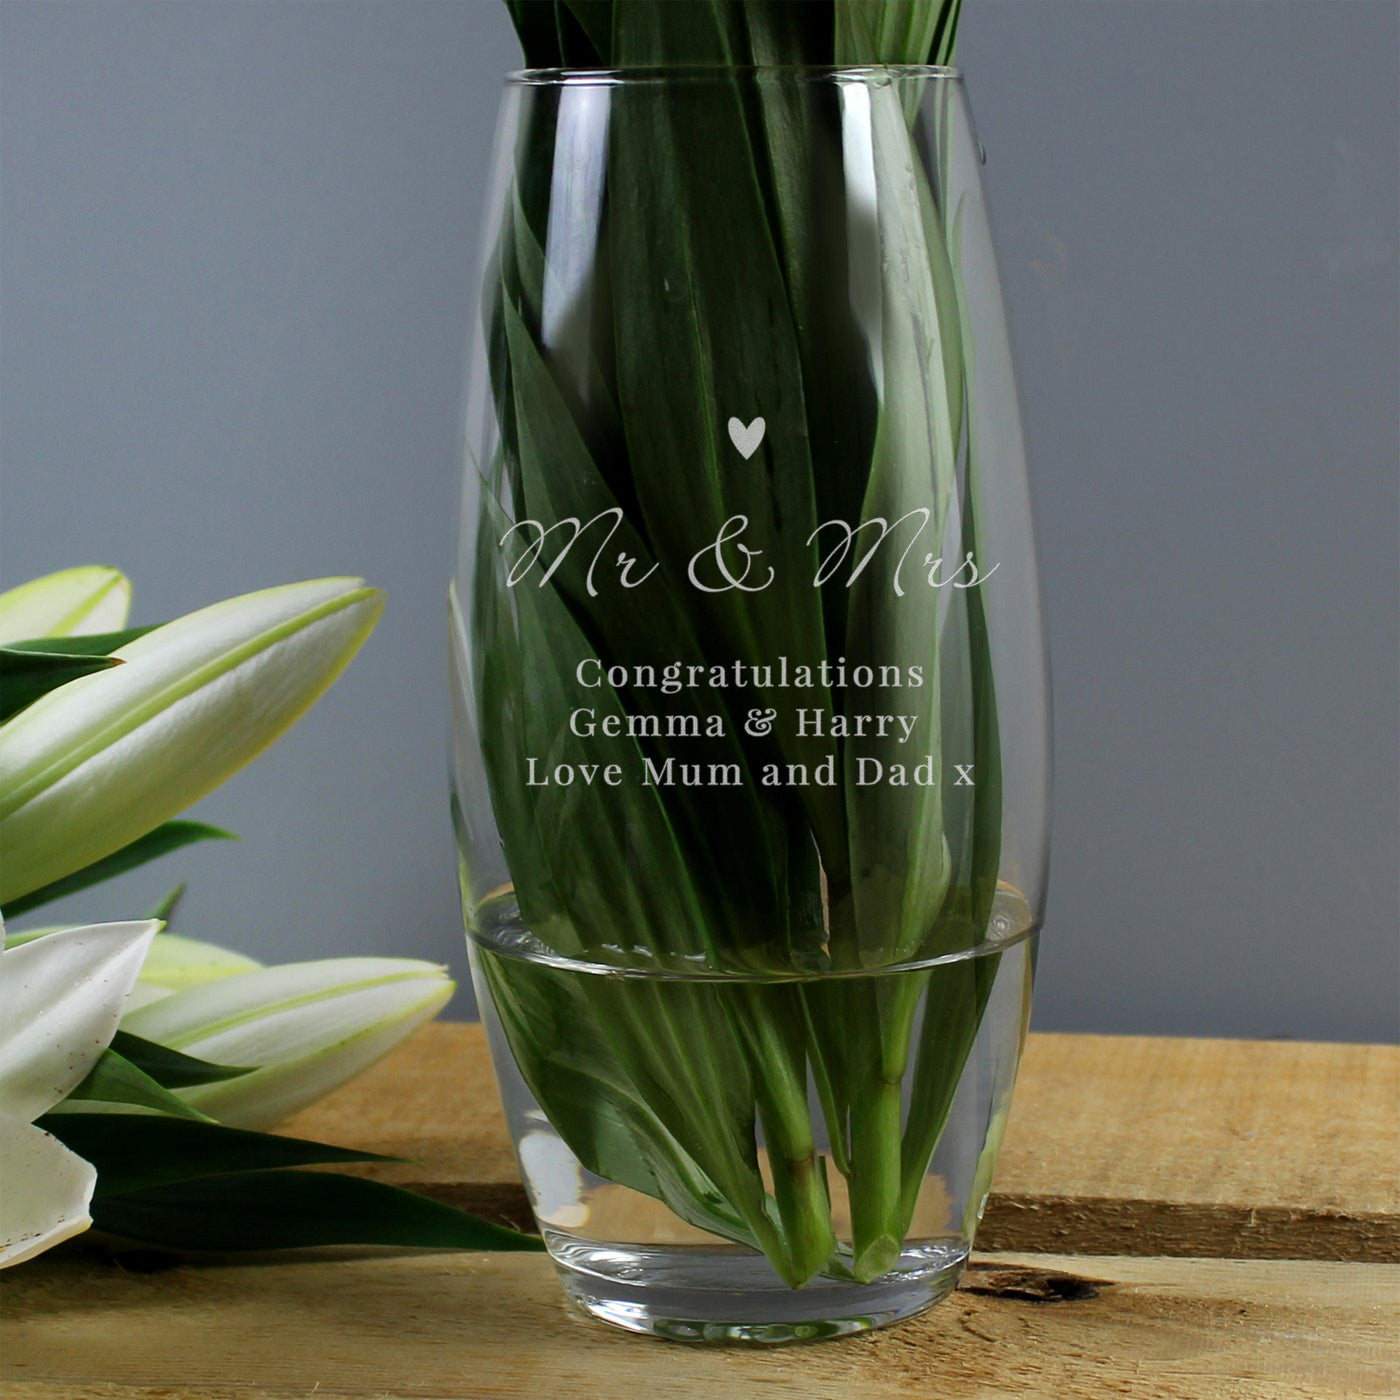 Personalised Love Heart Glass Bullet Vase - Shop Personalised Gifts